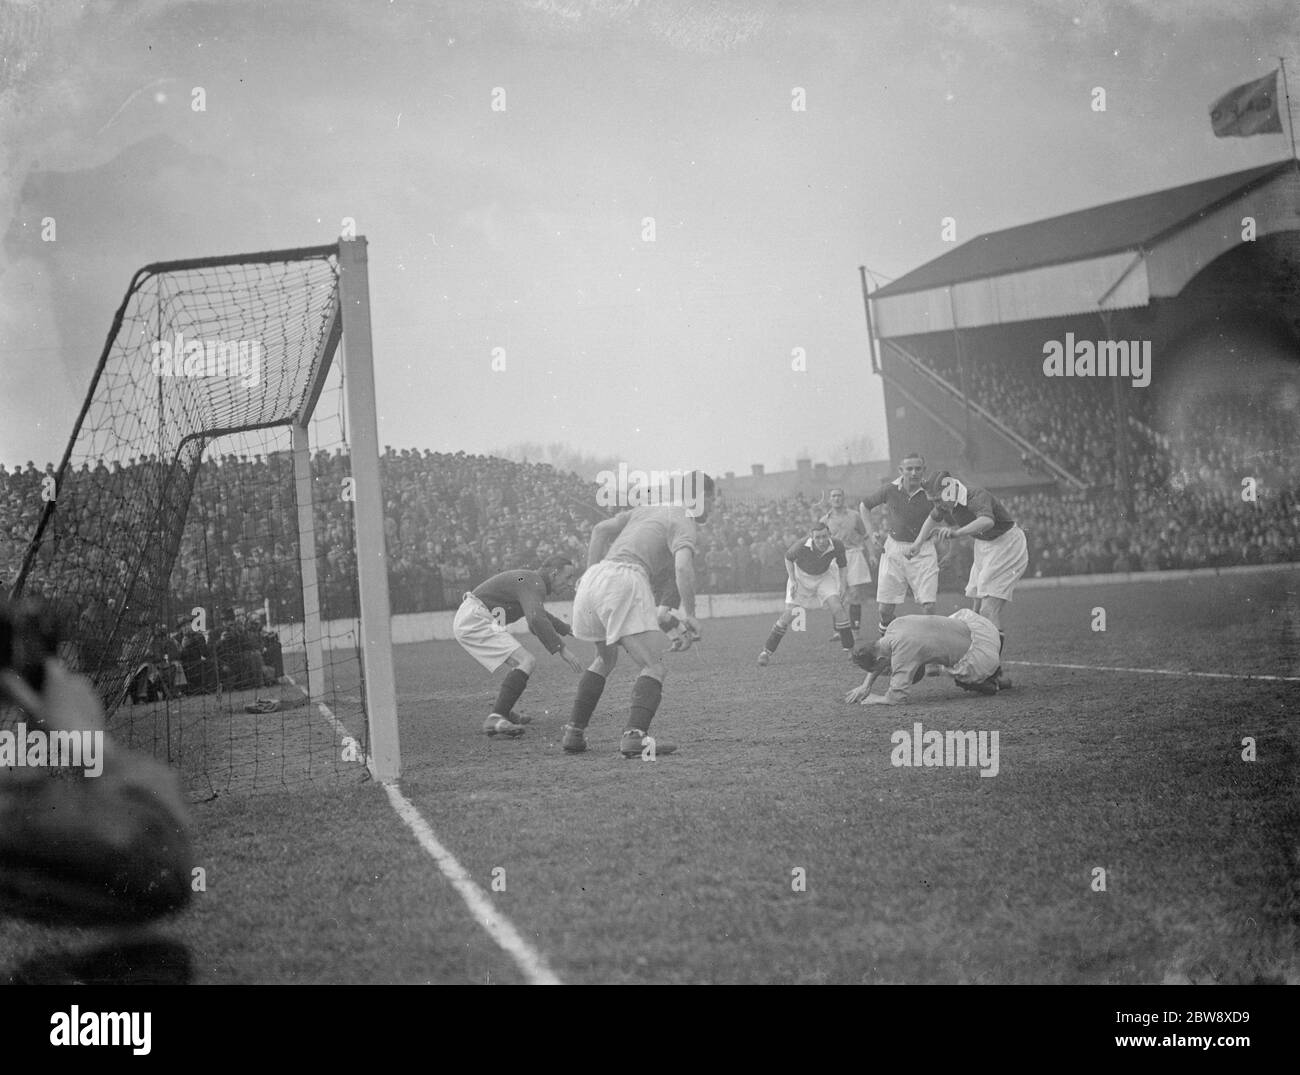 Nottingham Forest Football Club versus Charlton Athletic football club . Two players compete for the ball in front of goal . 10 April 1936 Stock Photo